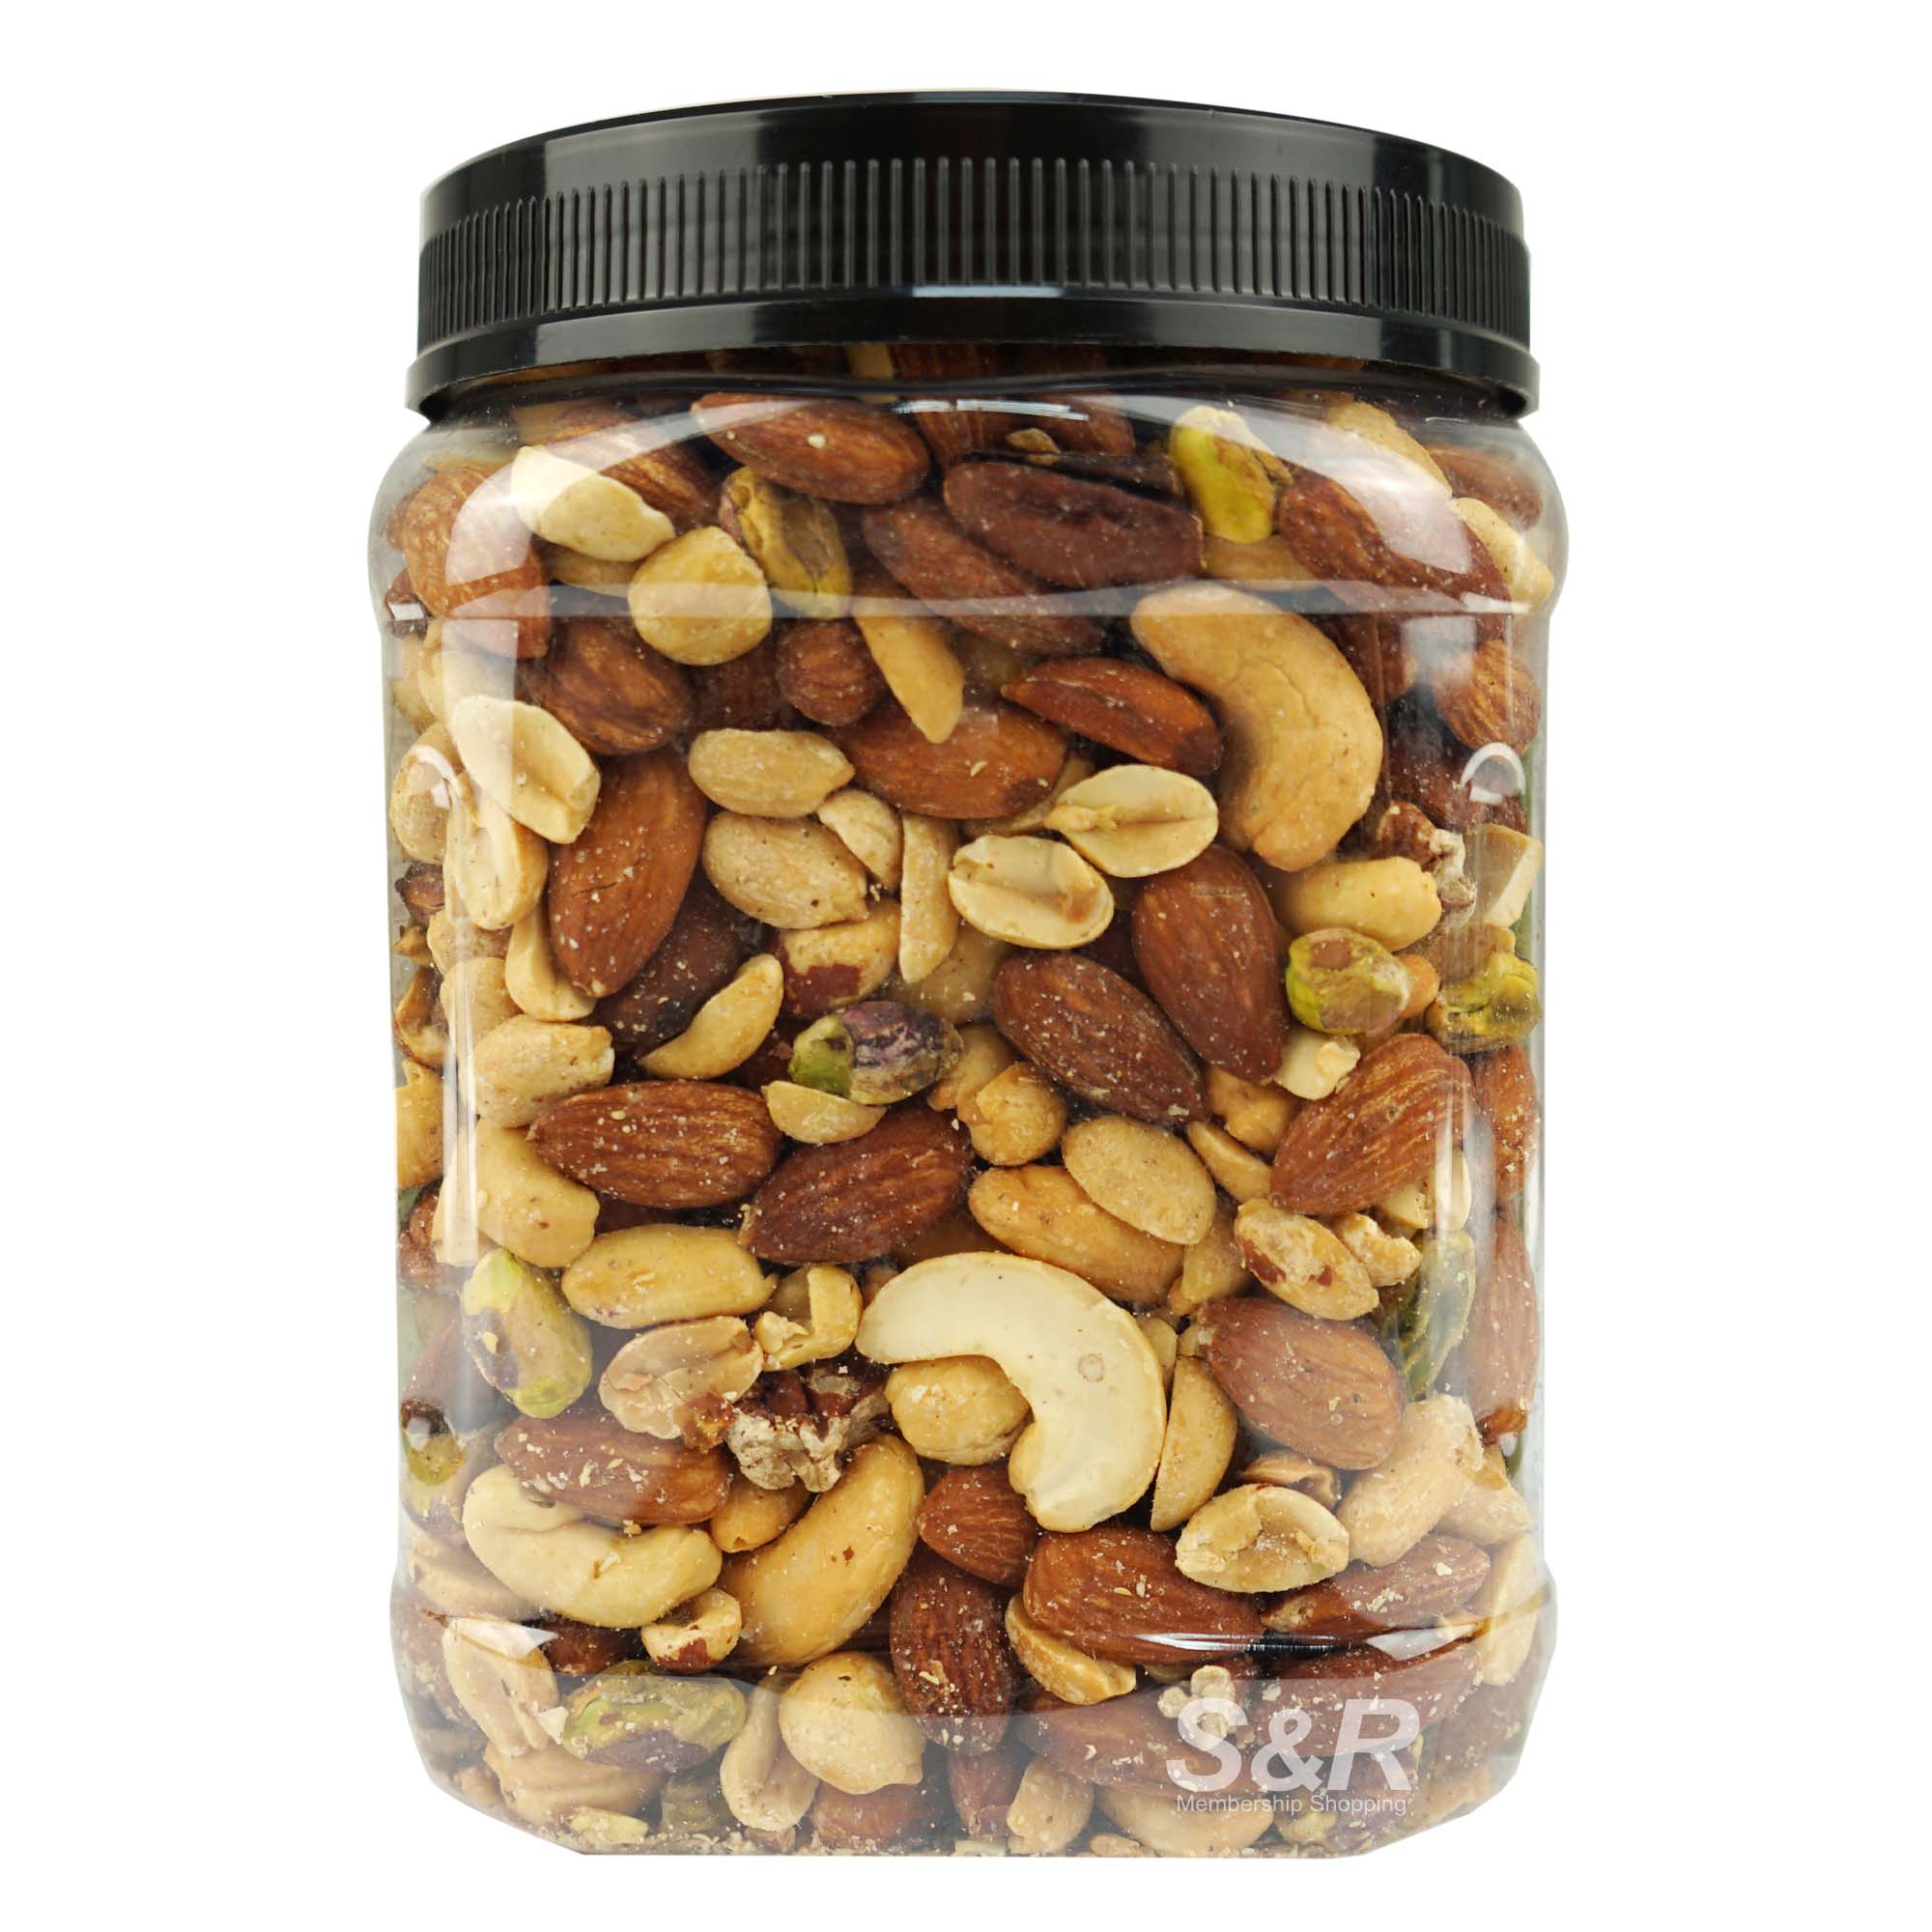 Unsalted Mixed Nuts